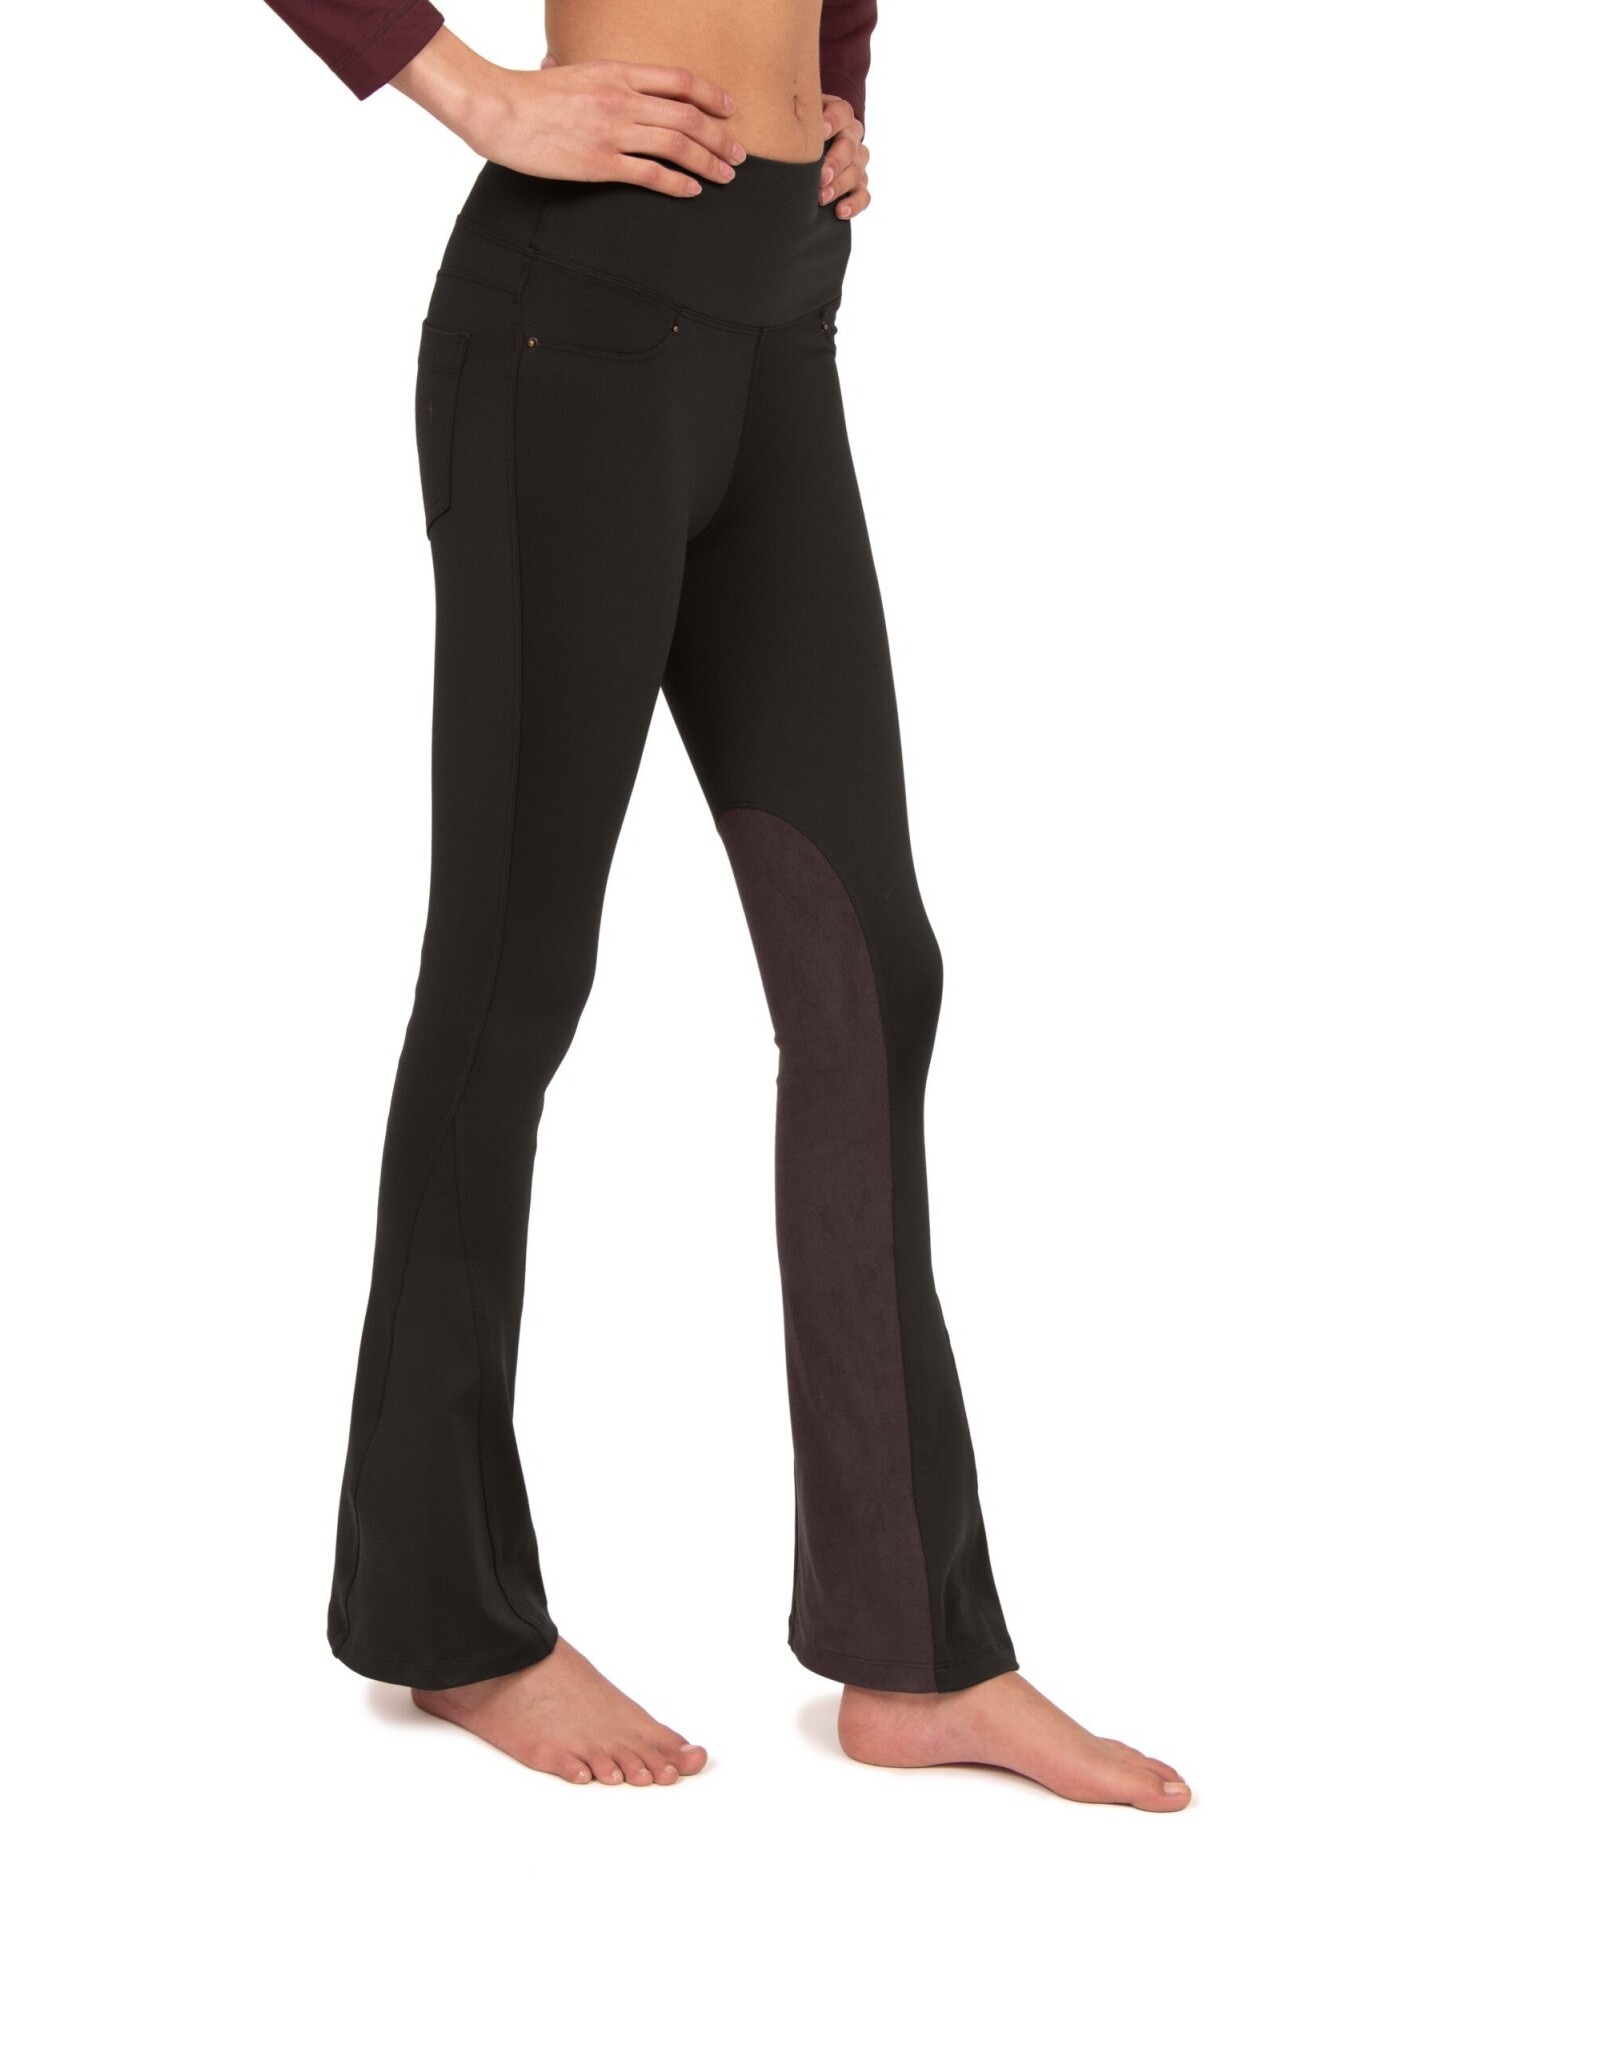 Chestnut Bay SkyCool® Bootcut Tights